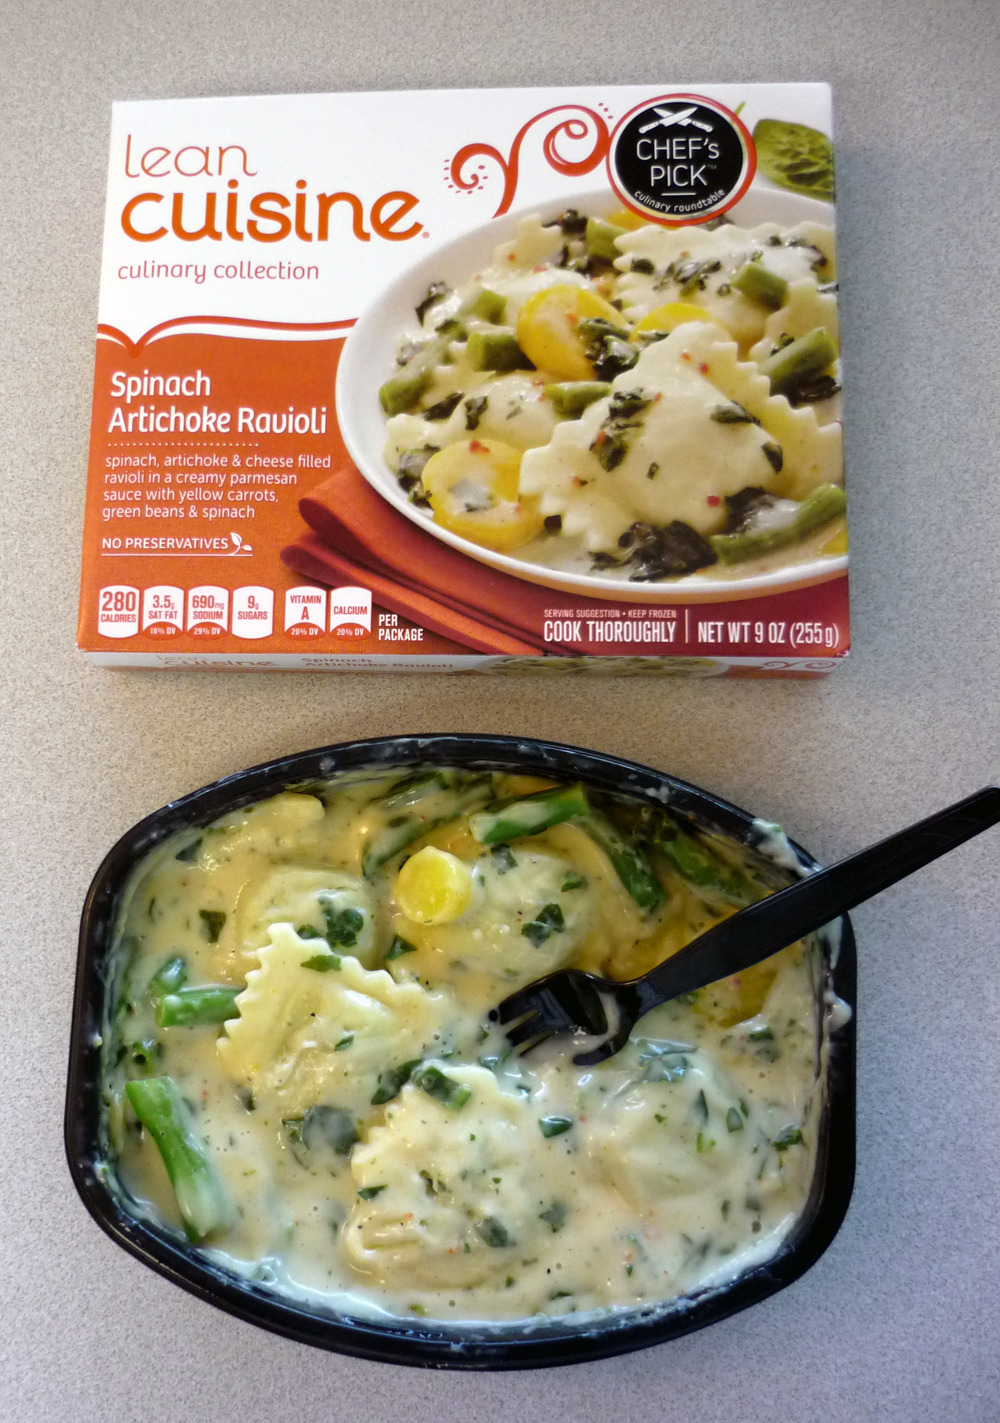 Frozen Diet Meals & You | Lean Cuisine Culinary Collection ...